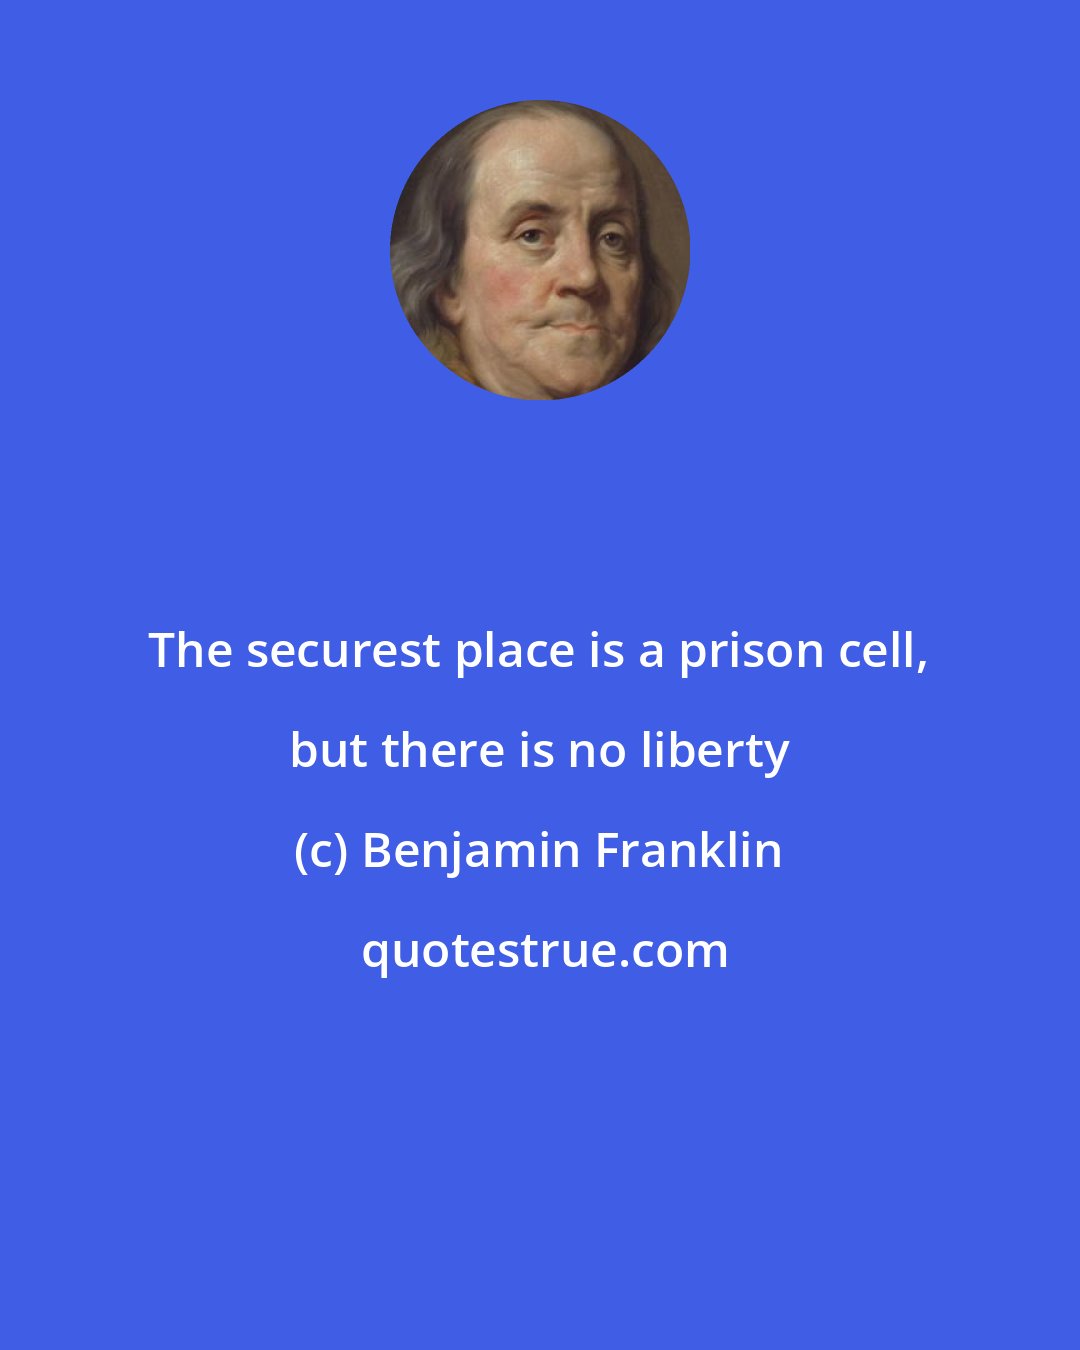 Benjamin Franklin: The securest place is a prison cell, but there is no liberty